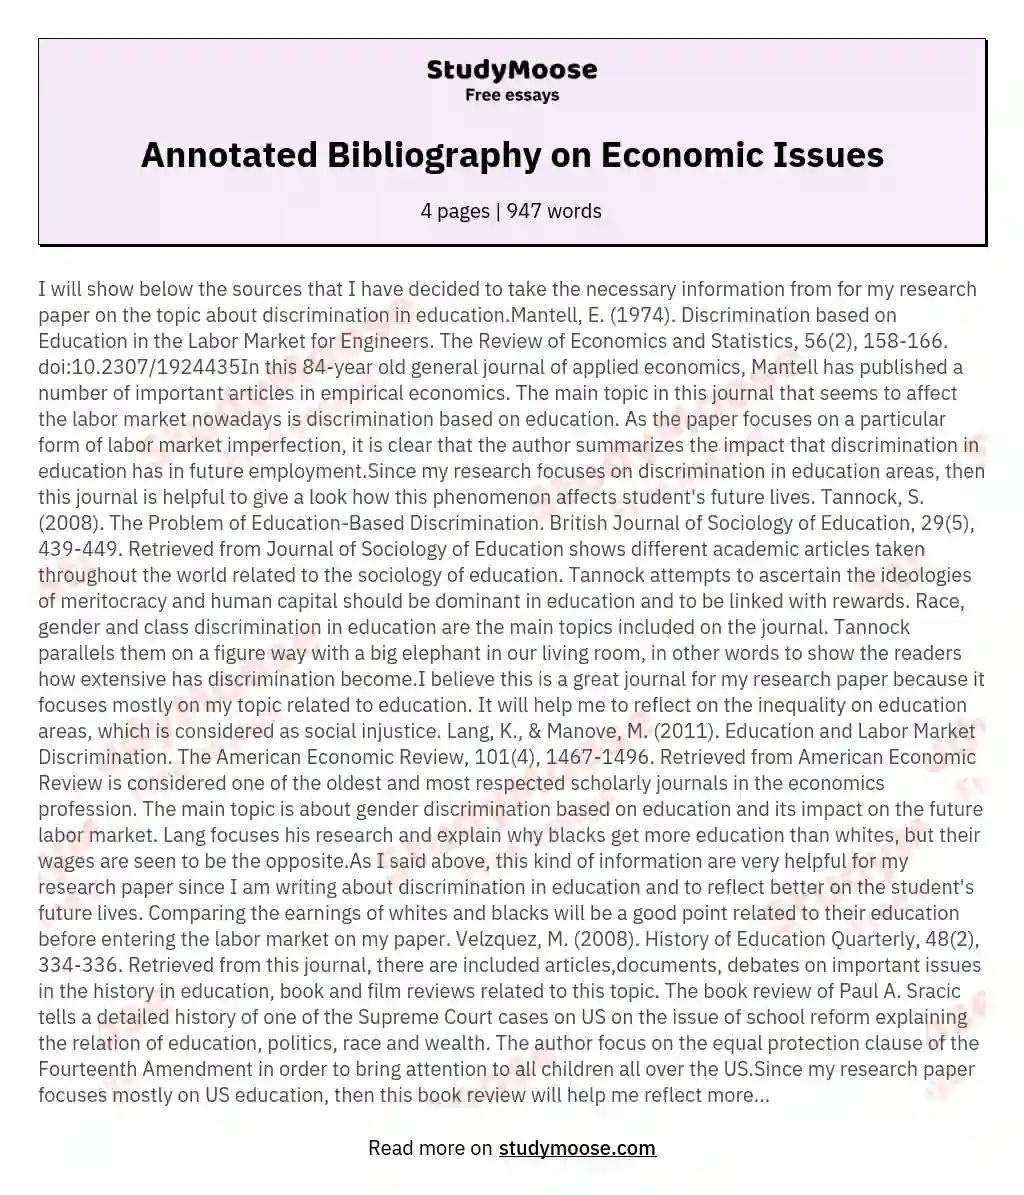 Annotated Bibliography on Economic Issues essay